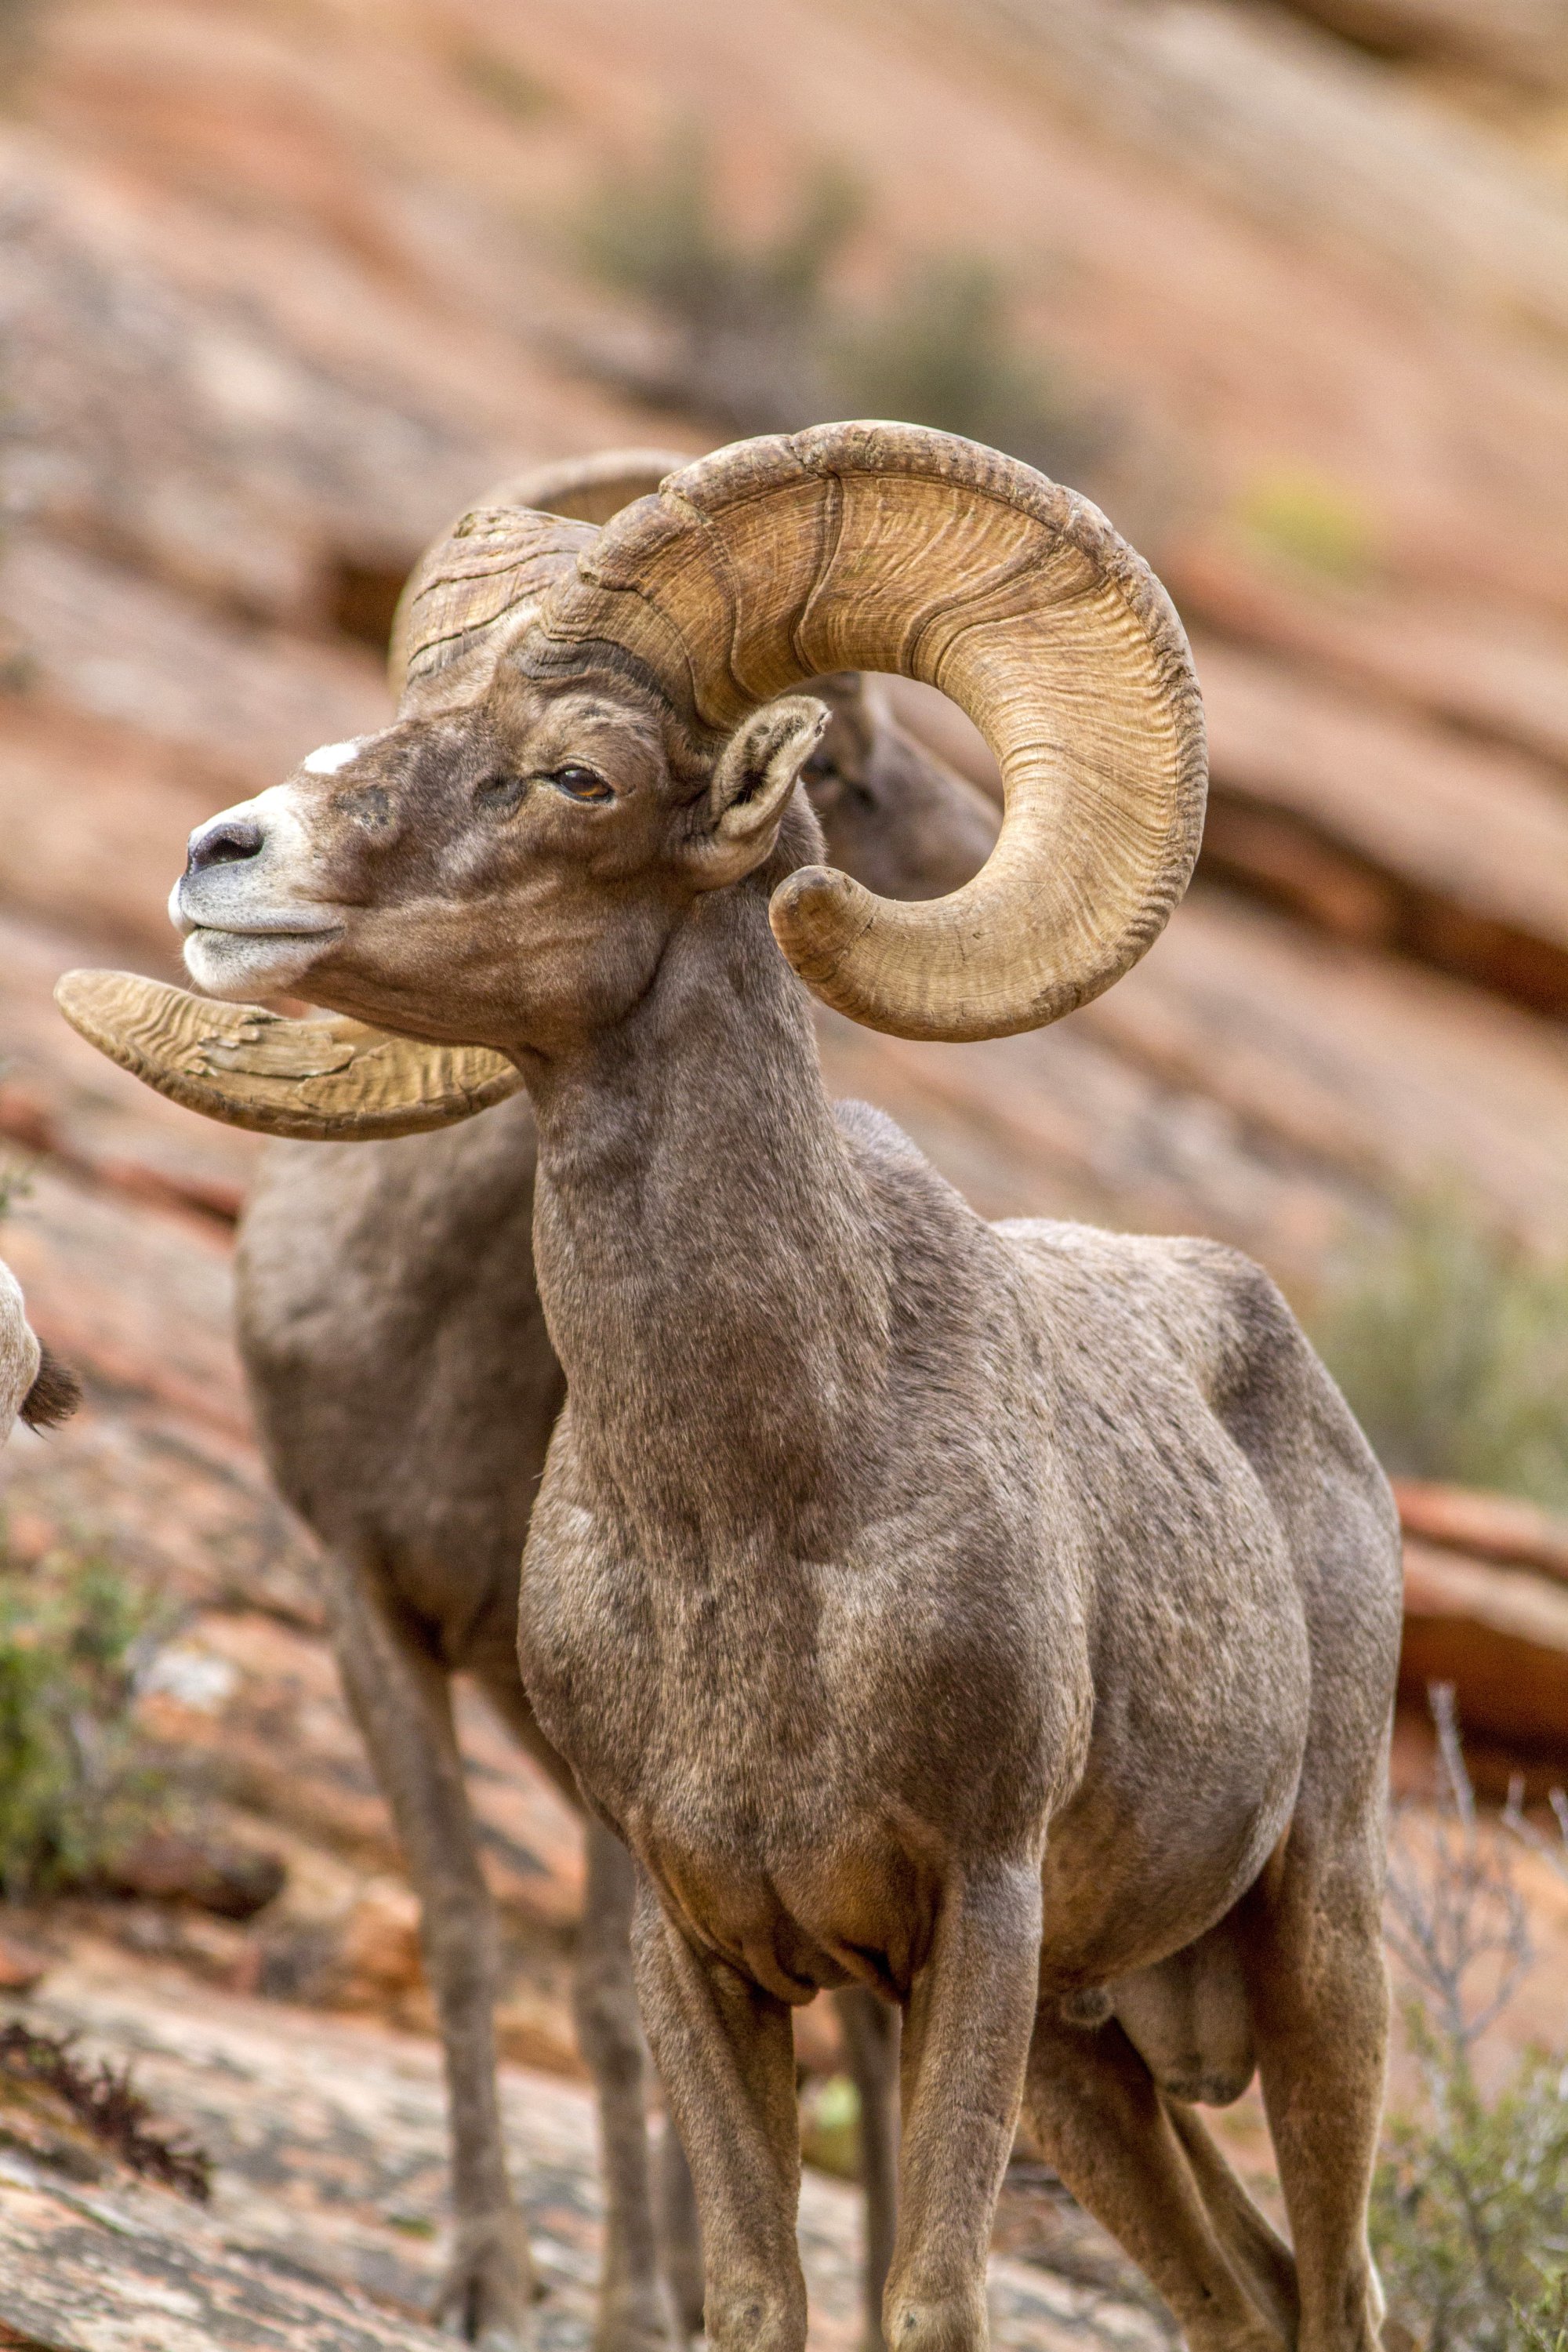 Hunting guide found guilty for allegedly poaching bighorn sheep in ...